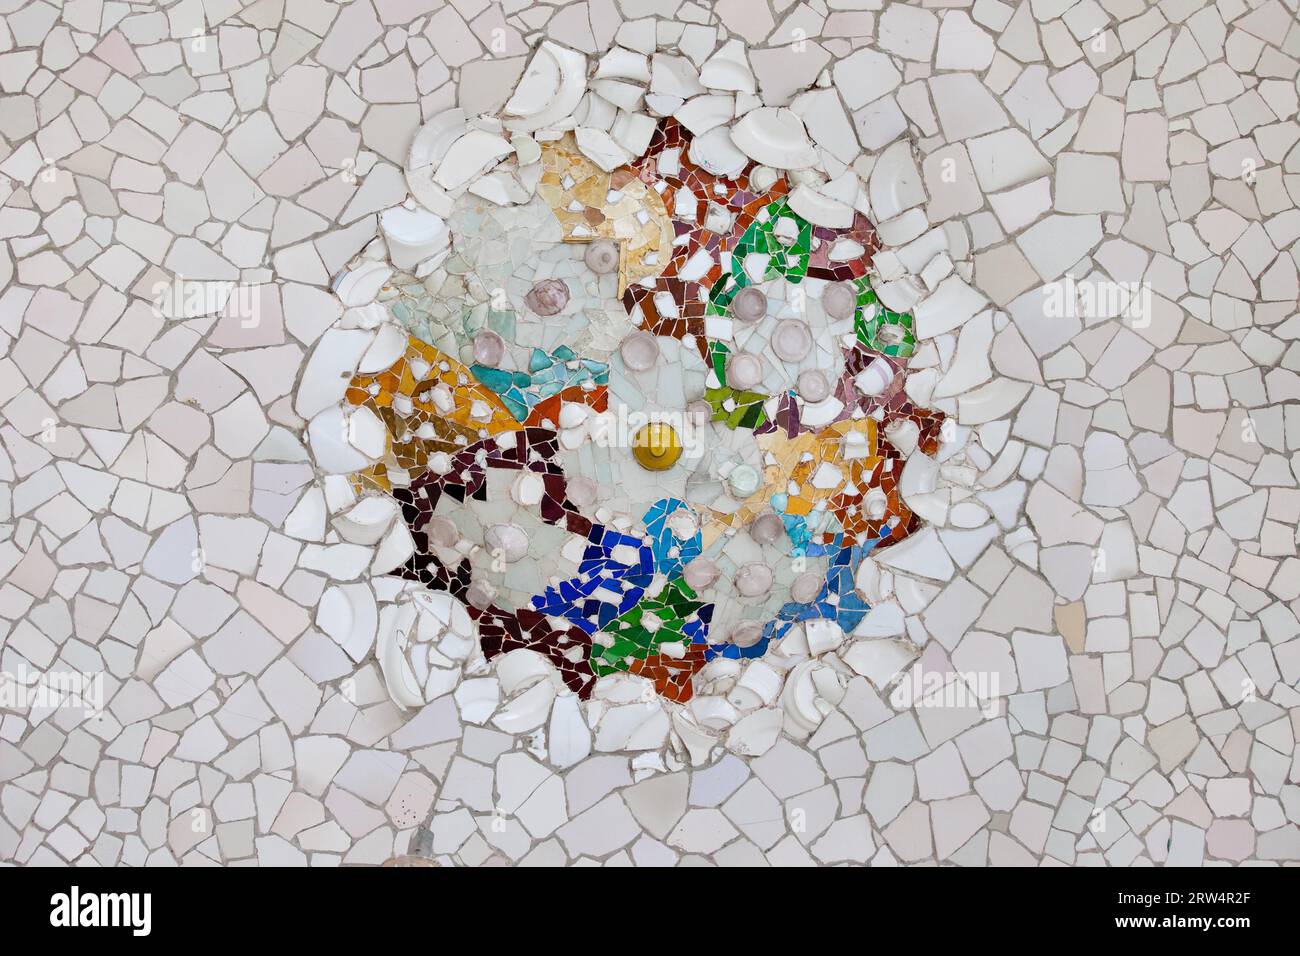 Trencadis mosaic from broken tile shards on the ceiling of Hypostyle Room in Park Guell, Barcelona, Catalonia, Spain Stock Photo